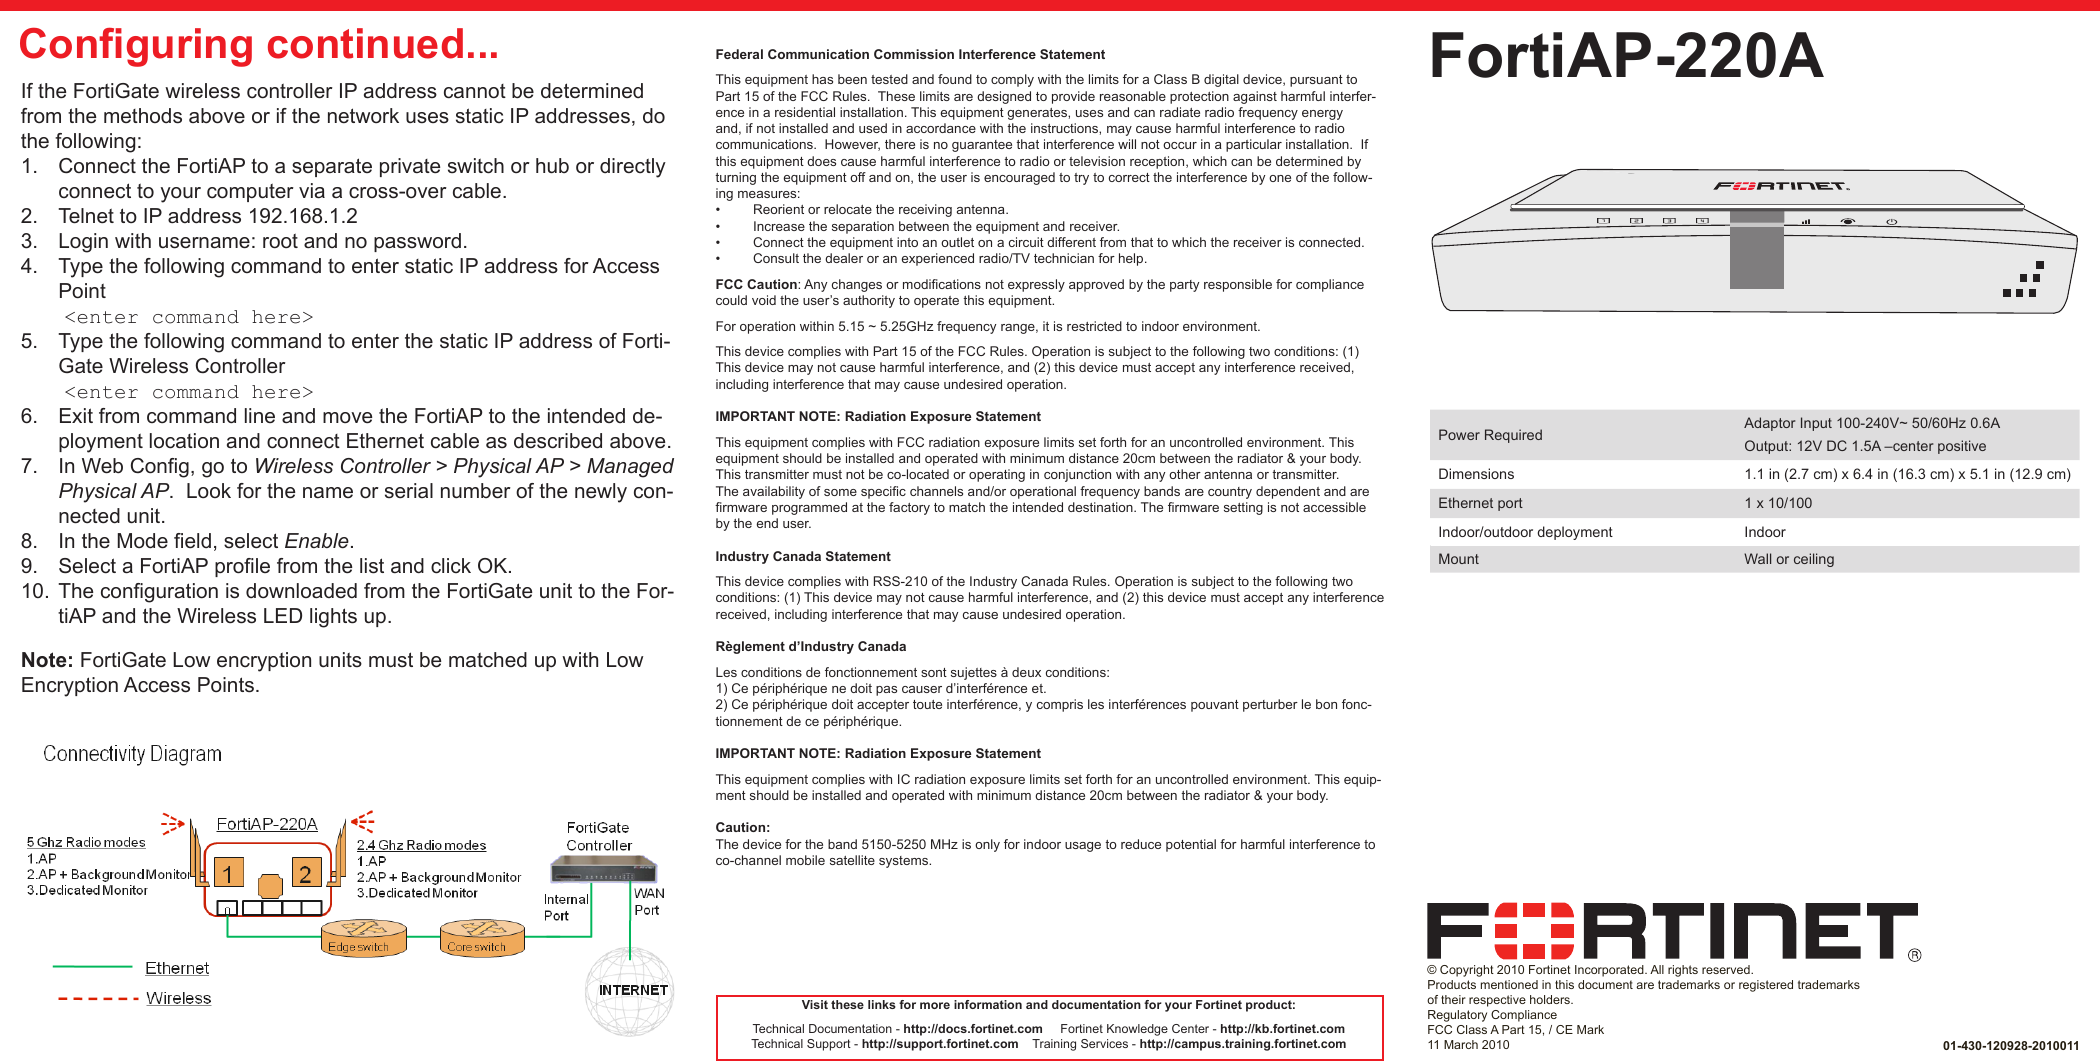 QuickStart Guide© Copyright 2010 Fortinet Incorporated. All rights reserved.  Products mentioned in this document are trademarks or registered trademarks of their respective holders.Regulatory ComplianceFCC Class A Part 15, / CE Mark11 March 2010FortiAP-220A01-430-120928-2010011Visit these links for more information and documentation for your Fortinet product:Technical Documentation - http://docs.fortinet.com     Fortinet Knowledge Center - http://kb.fortinet.comTechnical Support - http://support.fortinet.com    Training Services - http://campus.training.fortinet.comIf the FortiGate wireless controller IP address cannot be determined from the methods above or if the network uses static IP addresses, do the following:1.  Connect the FortiAP to a separate private switch or hub or directly connect to your computer via a cross-over cable. 2.  Telnet to IP address 192.168.1.23.  Login with username: root and no password.4.  Type the following command to enter static IP address for Access Point &lt;enter command here&gt;5.  Type the following command to enter the static IP address of Forti-Gate Wireless Controller &lt;enter command here&gt;6.  Exit from command line and move the FortiAP to the intended de-ployment location and connect Ethernet cable as described above.7.  In Web Cong, go to Wireless Controller &gt; Physical AP &gt; Managed Physical AP.  Look for the name or serial number of the newly con-nected unit.  8.  In the Mode eld, select Enable.  9.  Select a FortiAP prole from the list and click OK.10.  The conguration is downloaded from the FortiGate unit to the For-tiAP and the Wireless LED lights up.Note: FortiGate Low encryption units must be matched up with Low Encryption Access Points.Conguring continued...Power Required Adaptor Input 100-240V~ 50/60Hz 0.6AOutput: 12V DC 1.5A –center positiveDimensions 1.1 in (2.7 cm) x 6.4 in (16.3 cm) x 5.1 in (12.9 cm)Ethernet port 1 x 10/100Indoor/outdoor deployment IndoorMount Wall or ceilingFederal Communication Commission Interference StatementThis equipment has been tested and found to comply with the limits for a Class B digital device, pursuant to Part 15 of the FCC Rules.  These limits are designed to provide reasonable protection against harmful interfer-ence in a residential installation. This equipment generates, uses and can radiate radio frequency energy and, if not installed and used in accordance with the instructions, may cause harmful interference to radio communications.  However, there is no guarantee that interference will not occur in a particular installation.  If this equipment does cause harmful interference to radio or television reception, which can be determined by turning the equipment off and on, the user is encouraged to try to correct the interference by one of the follow-ing measures:•  Reorient or relocate the receiving antenna.•  Increase the separation between the equipment and receiver.•  Connect the equipment into an outlet on a circuit different from that to which the receiver is connected.•  Consult the dealer or an experienced radio/TV technician for help.FCC Caution: Any changes or modications not expressly approved by the party responsible for compliance could void the user’s authority to operate this equipment.For operation within 5.15 ~ 5.25GHz frequency range, it is restricted to indoor environment.This device complies with Part 15 of the FCC Rules. Operation is subject to the following two conditions: (1) This device may not cause harmful interference, and (2) this device must accept any interference received, including interference that may cause undesired operation.IMPORTANT NOTE: Radiation Exposure StatementThis equipment complies with FCC radiation exposure limits set forth for an uncontrolled environment. This equipment should be installed and operated with minimum distance 20cm between the radiator &amp; your body.This transmitter must not be co-located or operating in conjunction with any other antenna or transmitter.The availability of some specic channels and/or operational frequency bands are country dependent and are rmware programmed at the factory to match the intended destination. The rmware setting is not accessible by the end user. Industry Canada StatementThis device complies with RSS-210 of the Industry Canada Rules. Operation is subject to the following two conditions: (1) This device may not cause harmful interference, and (2) this device must accept any interference received, including interference that may cause undesired operation. Règlement d’Industry Canada Les conditions de fonctionnement sont sujettes à deux conditions:1) Ce périphérique ne doit pas causer d’interférence et.2) Ce périphérique doit accepter toute interférence, y compris les interférences pouvant perturber le bon fonc-tionnement de ce périphérique. IMPORTANT NOTE: Radiation Exposure StatementThis equipment complies with IC radiation exposure limits set forth for an uncontrolled environment. This equip-ment should be installed and operated with minimum distance 20cm between the radiator &amp; your body. Caution:The device for the band 5150-5250 MHz is only for indoor usage to reduce potential for harmful interference to co-channel mobile satellite systems.